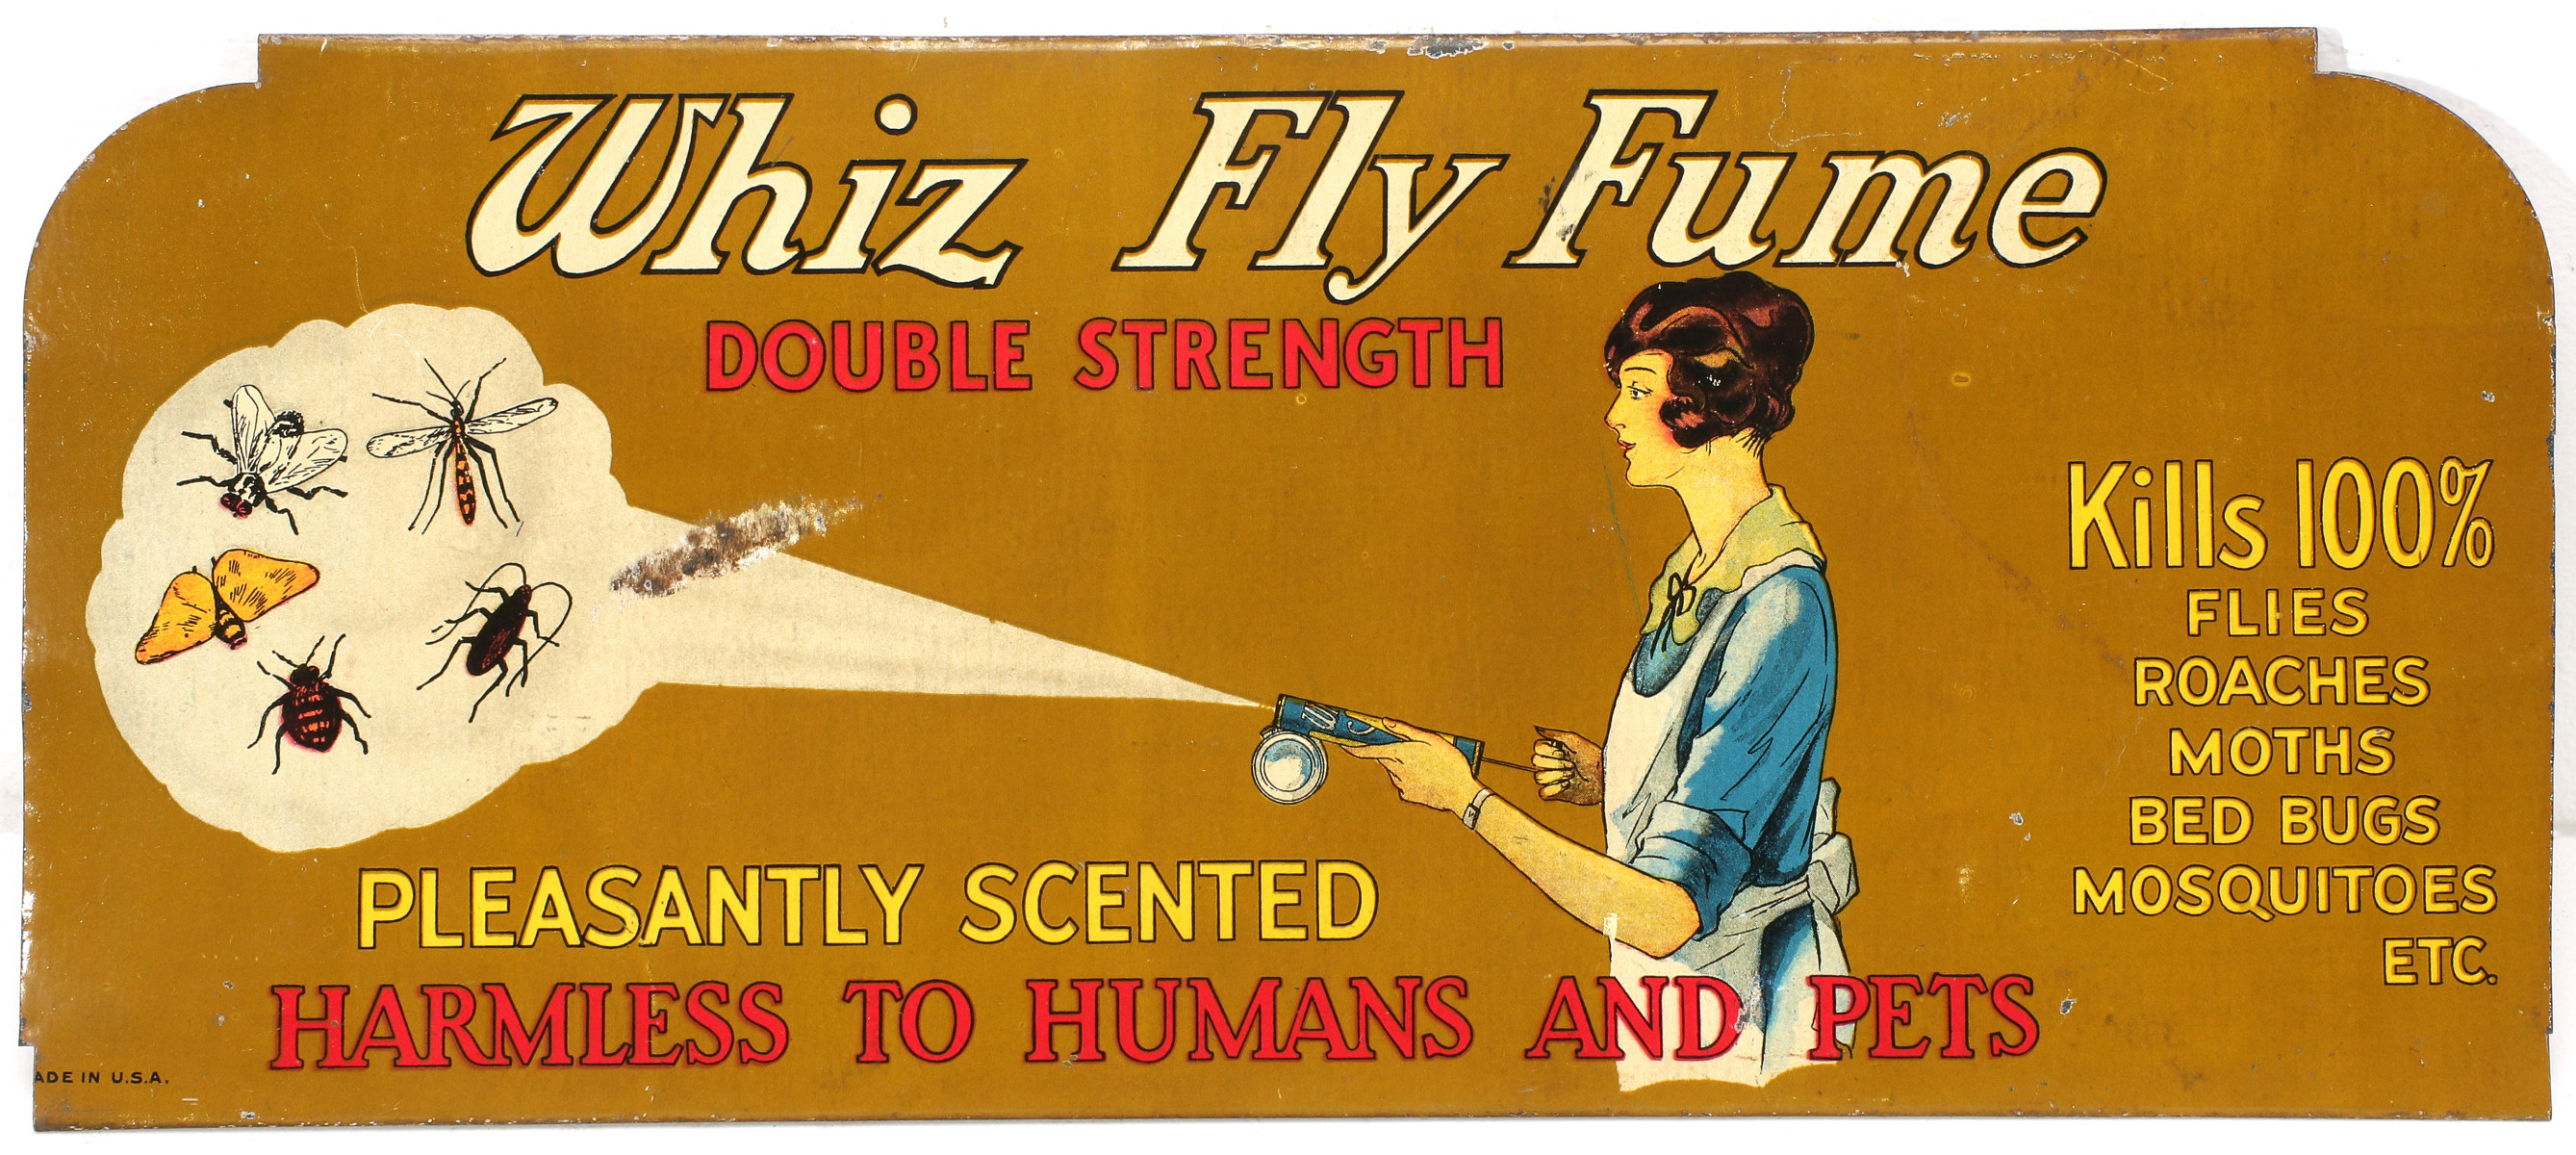 A LITHOGRAPHED TIN SIGN FOR WHIZ FLY FUME